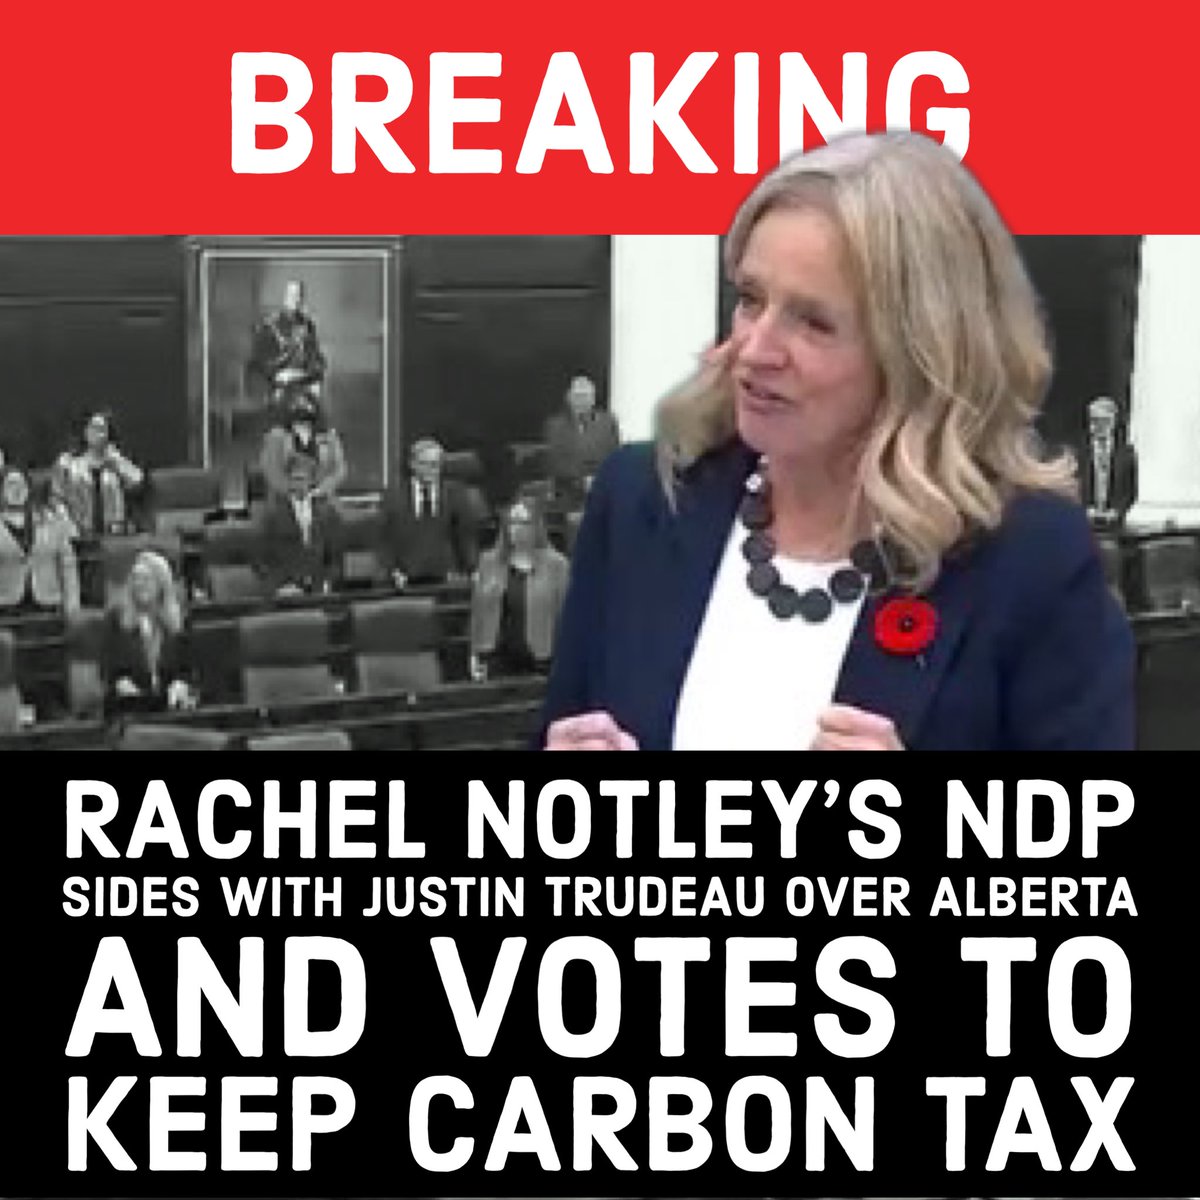 Unfathomable. Rachel Notley’s NDP just stood up in the legislature and voted to keep the carbon tax and continue supporting Justin Trudeau’s unfair treatment of our province. Our United Conservative team will continue to fight for an end to the carbon tax!